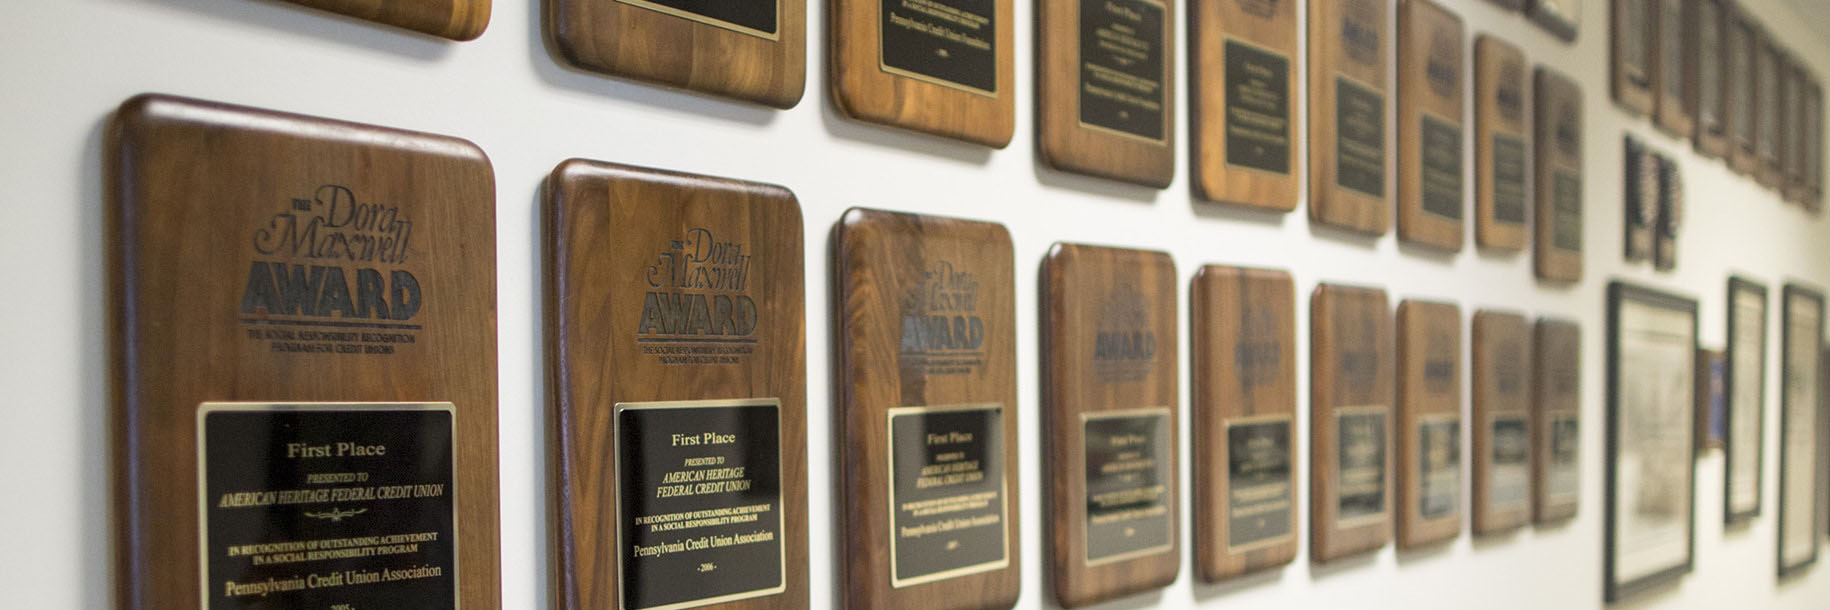 Award plaques hung on wall